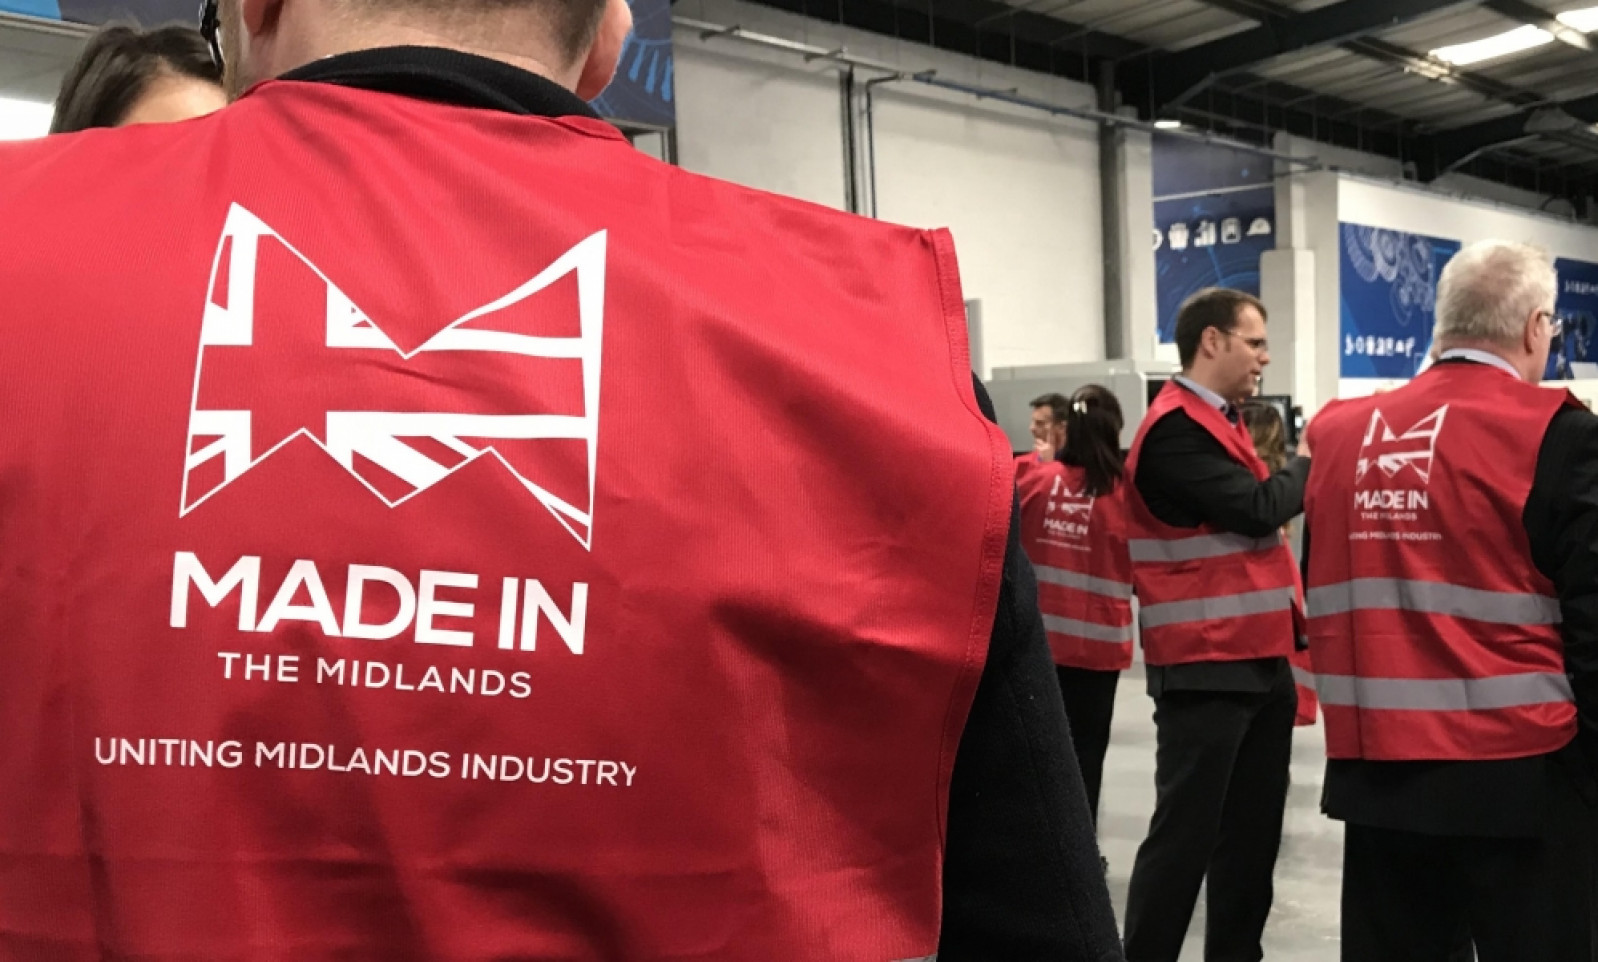 Manufacturers demonstrate support for 2018 Made in the Midlands exhibition